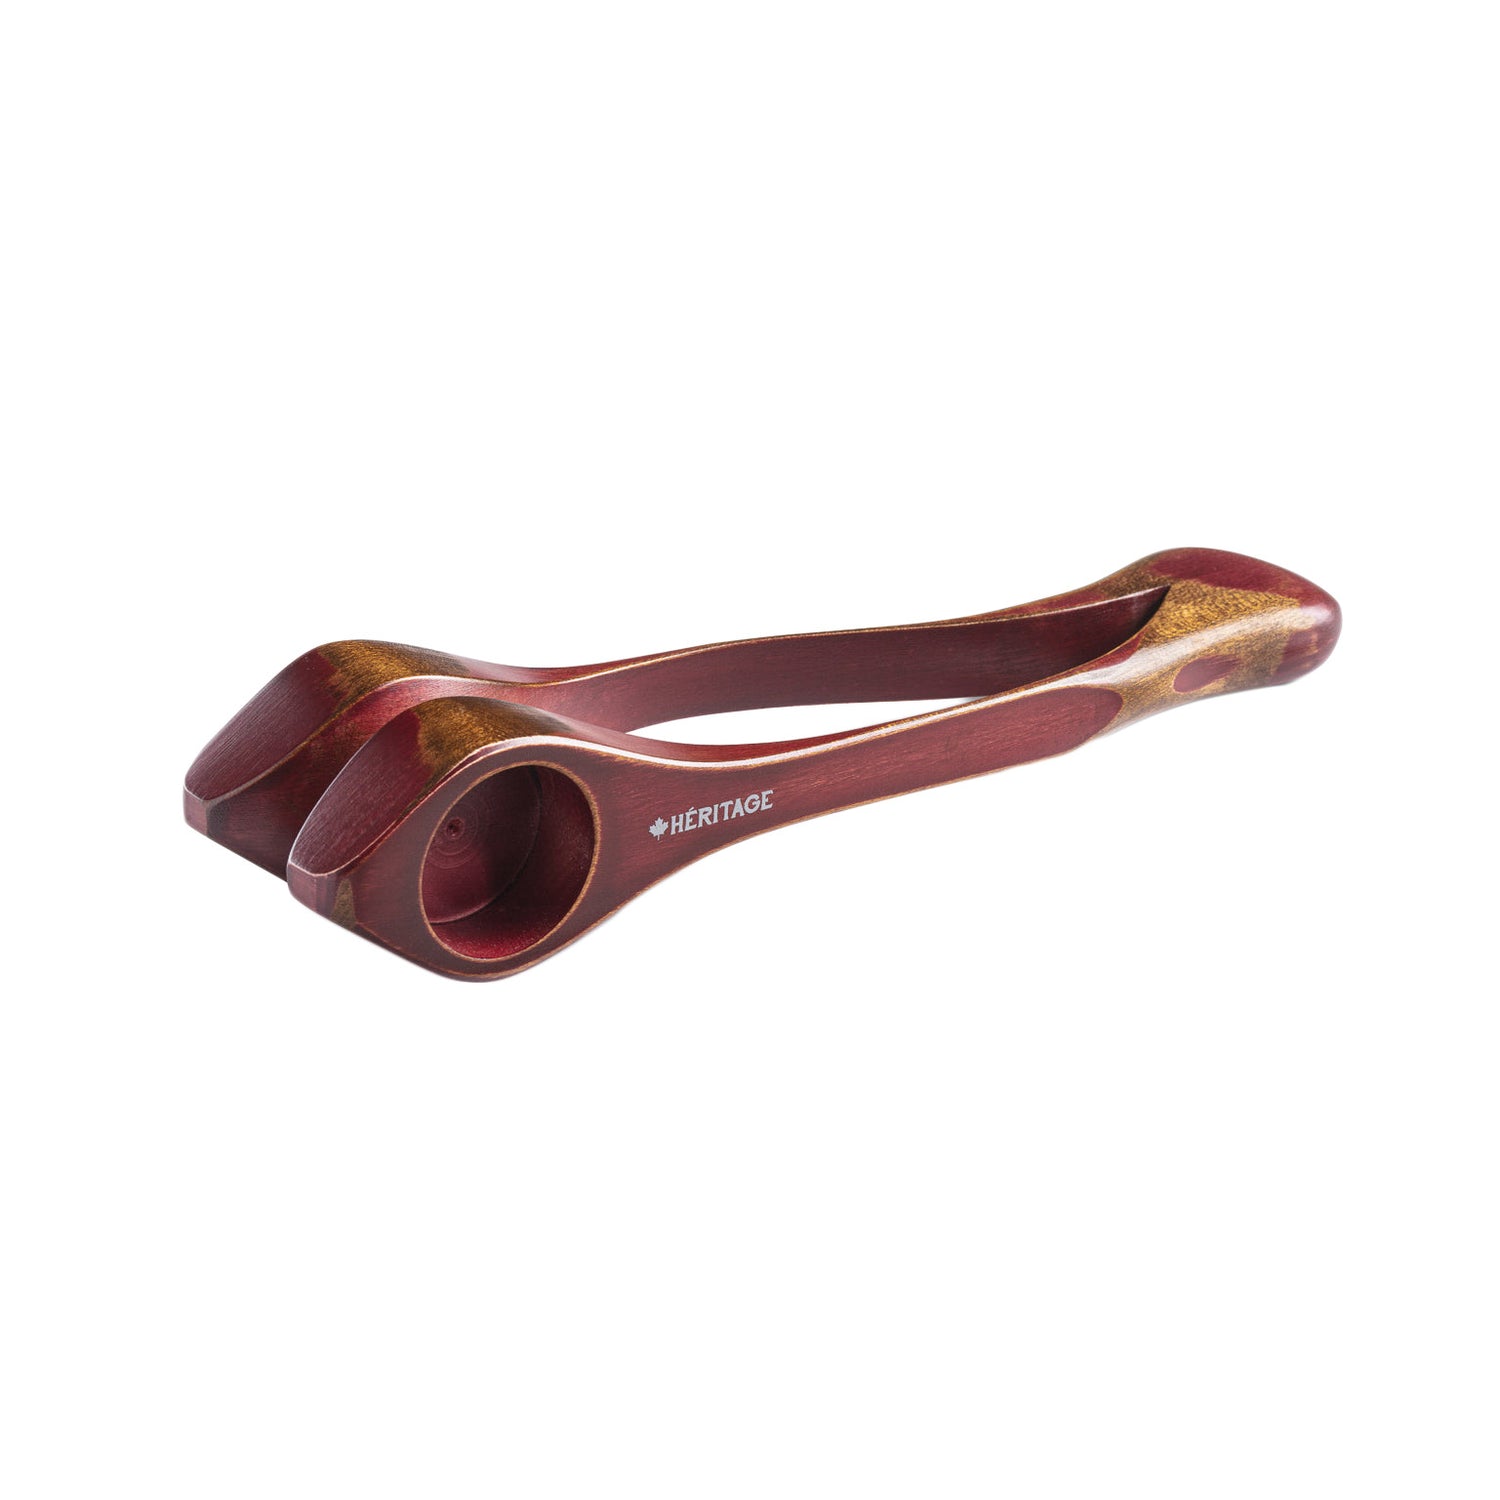 Image 1 of Heritage Musical Spoons, Large, Burgandy - SKU# SPOONS-LBU : Product Type Percussion Instruments : Elderly Instruments